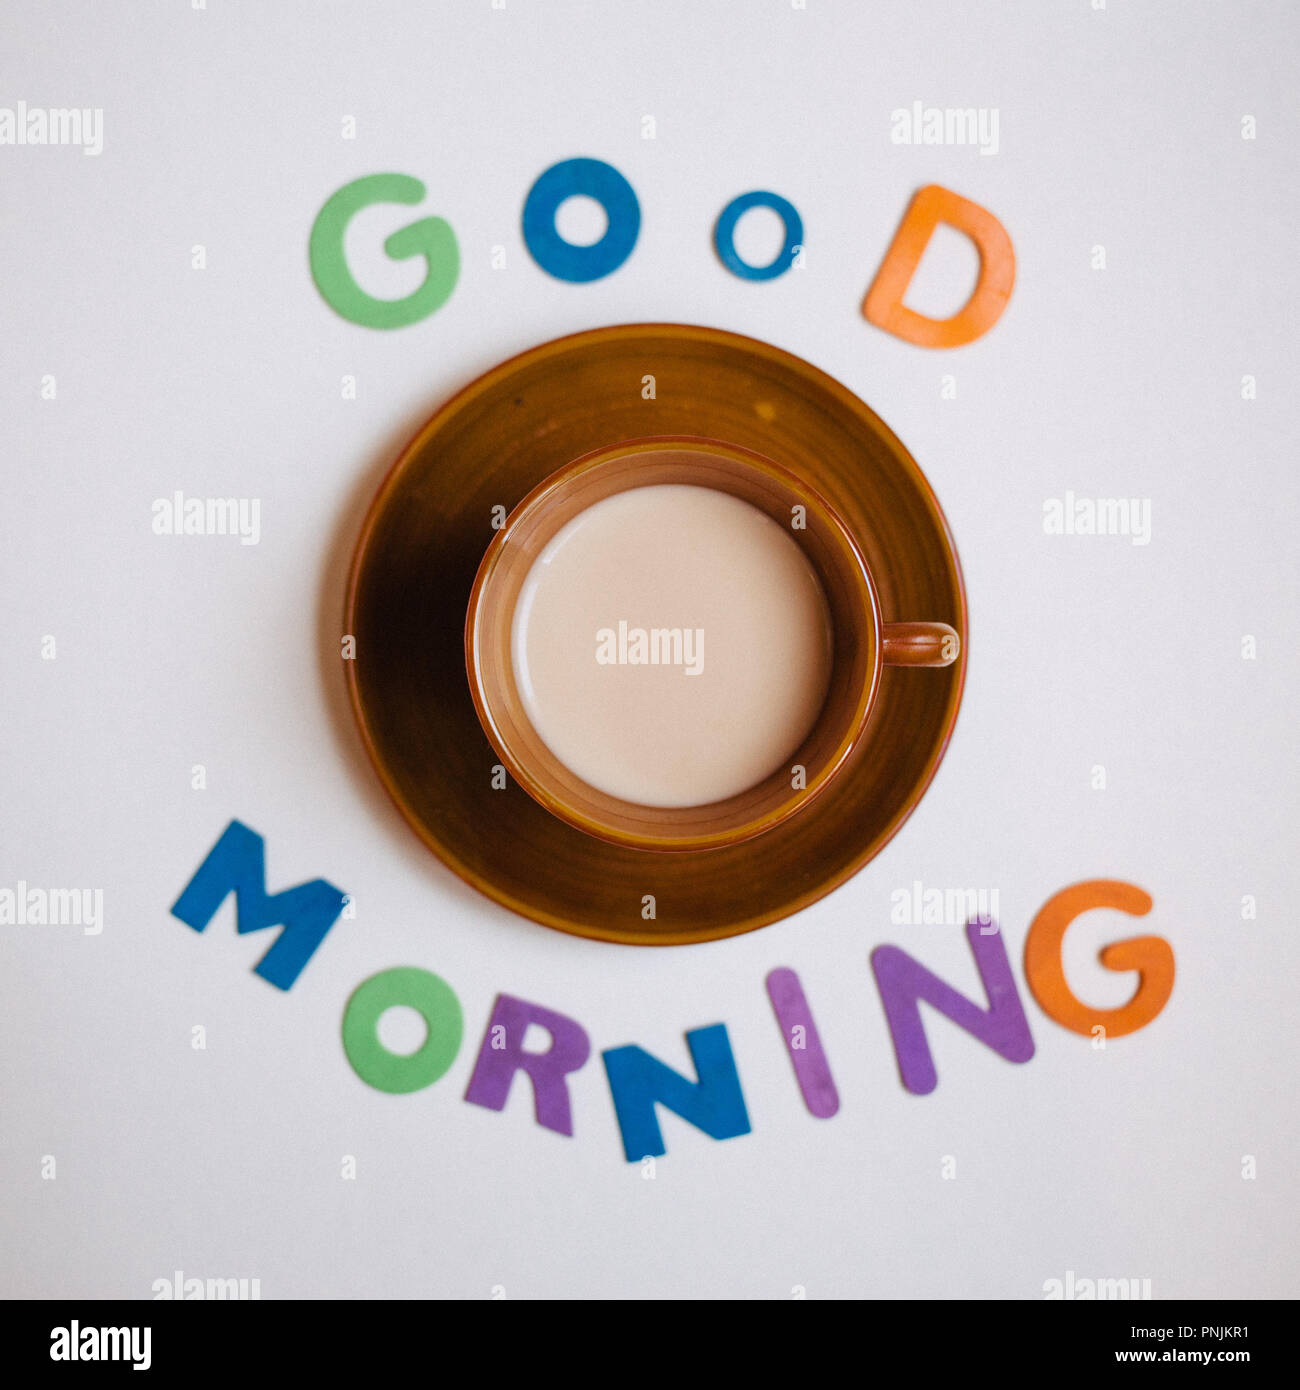 Good Morning ,Cup of coffee with the colorful alphabet letters Stock Photo